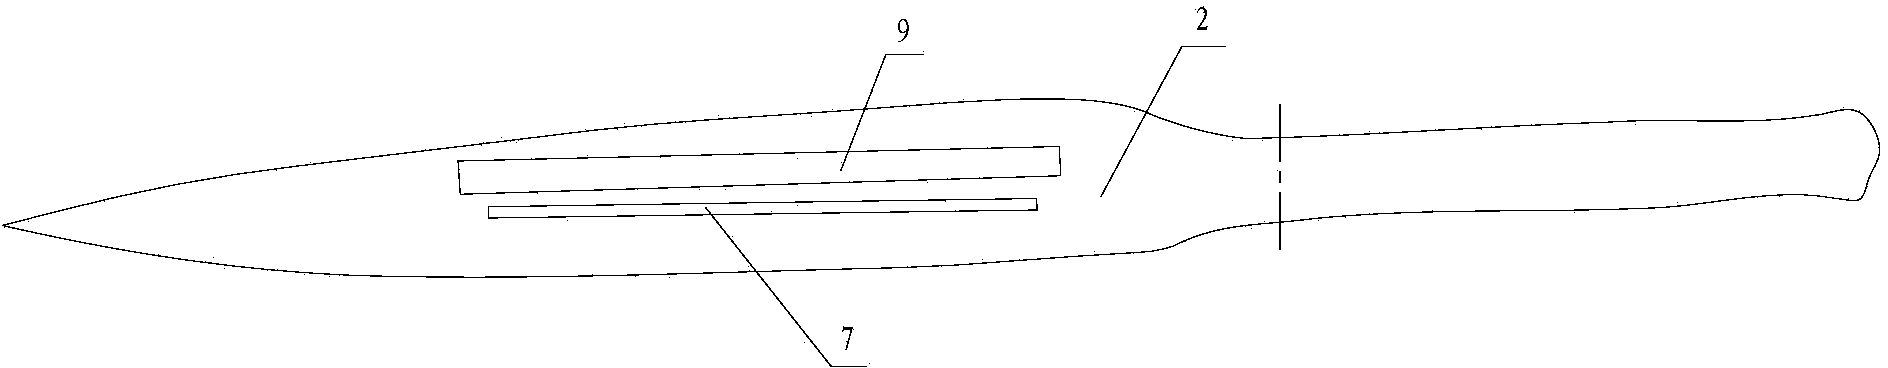 Surgical suture removing scissors for removing wound suture